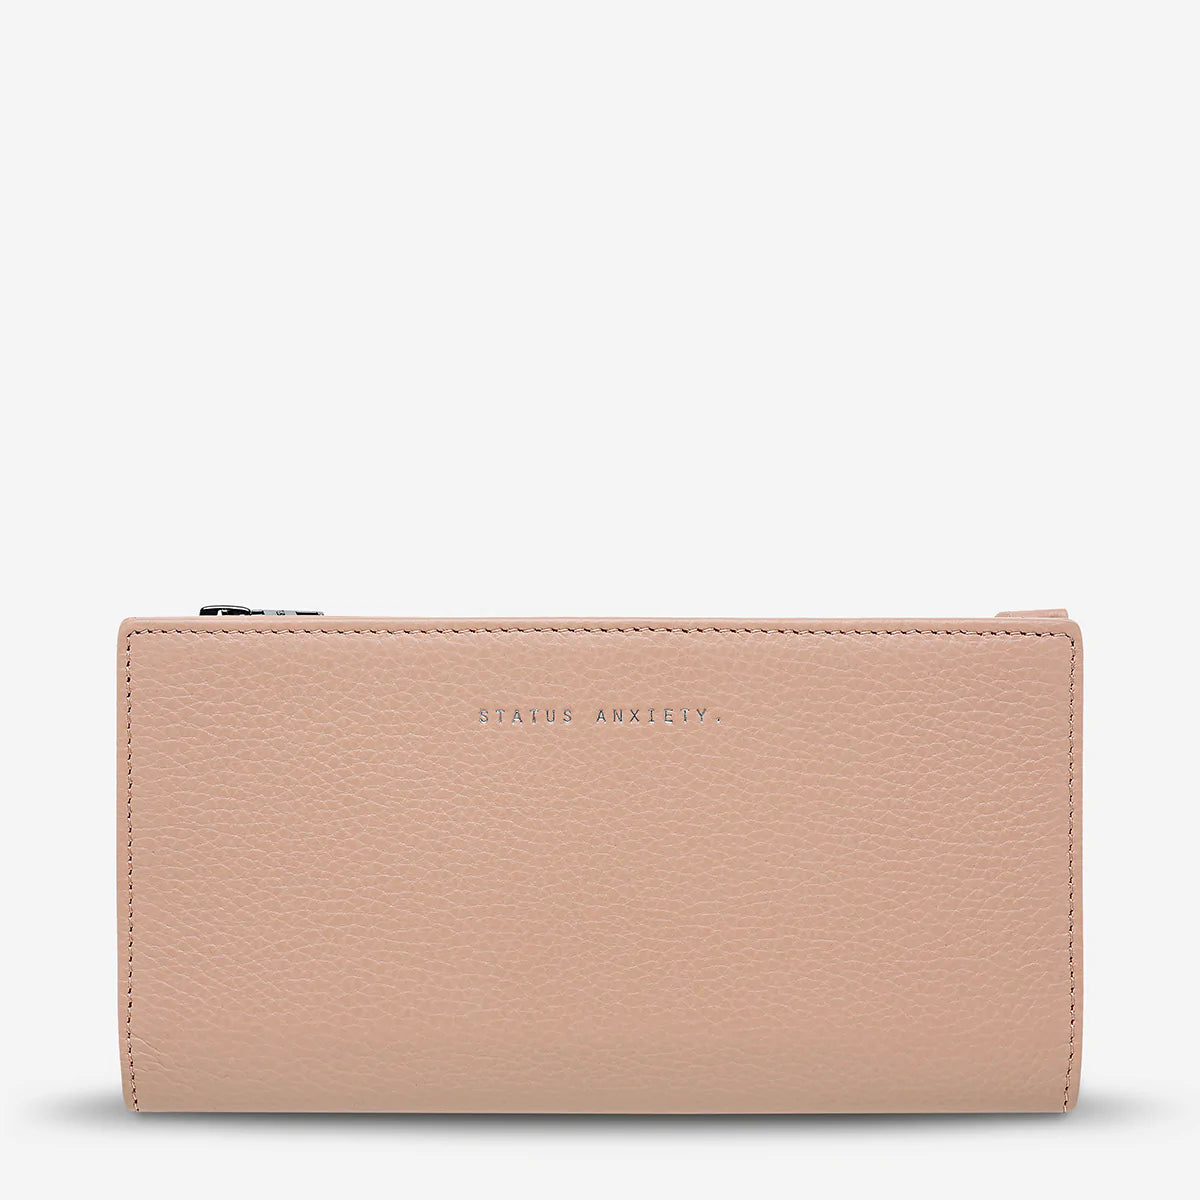 status-anxiety-wallet-old-flame-dusty-pink-front.webp